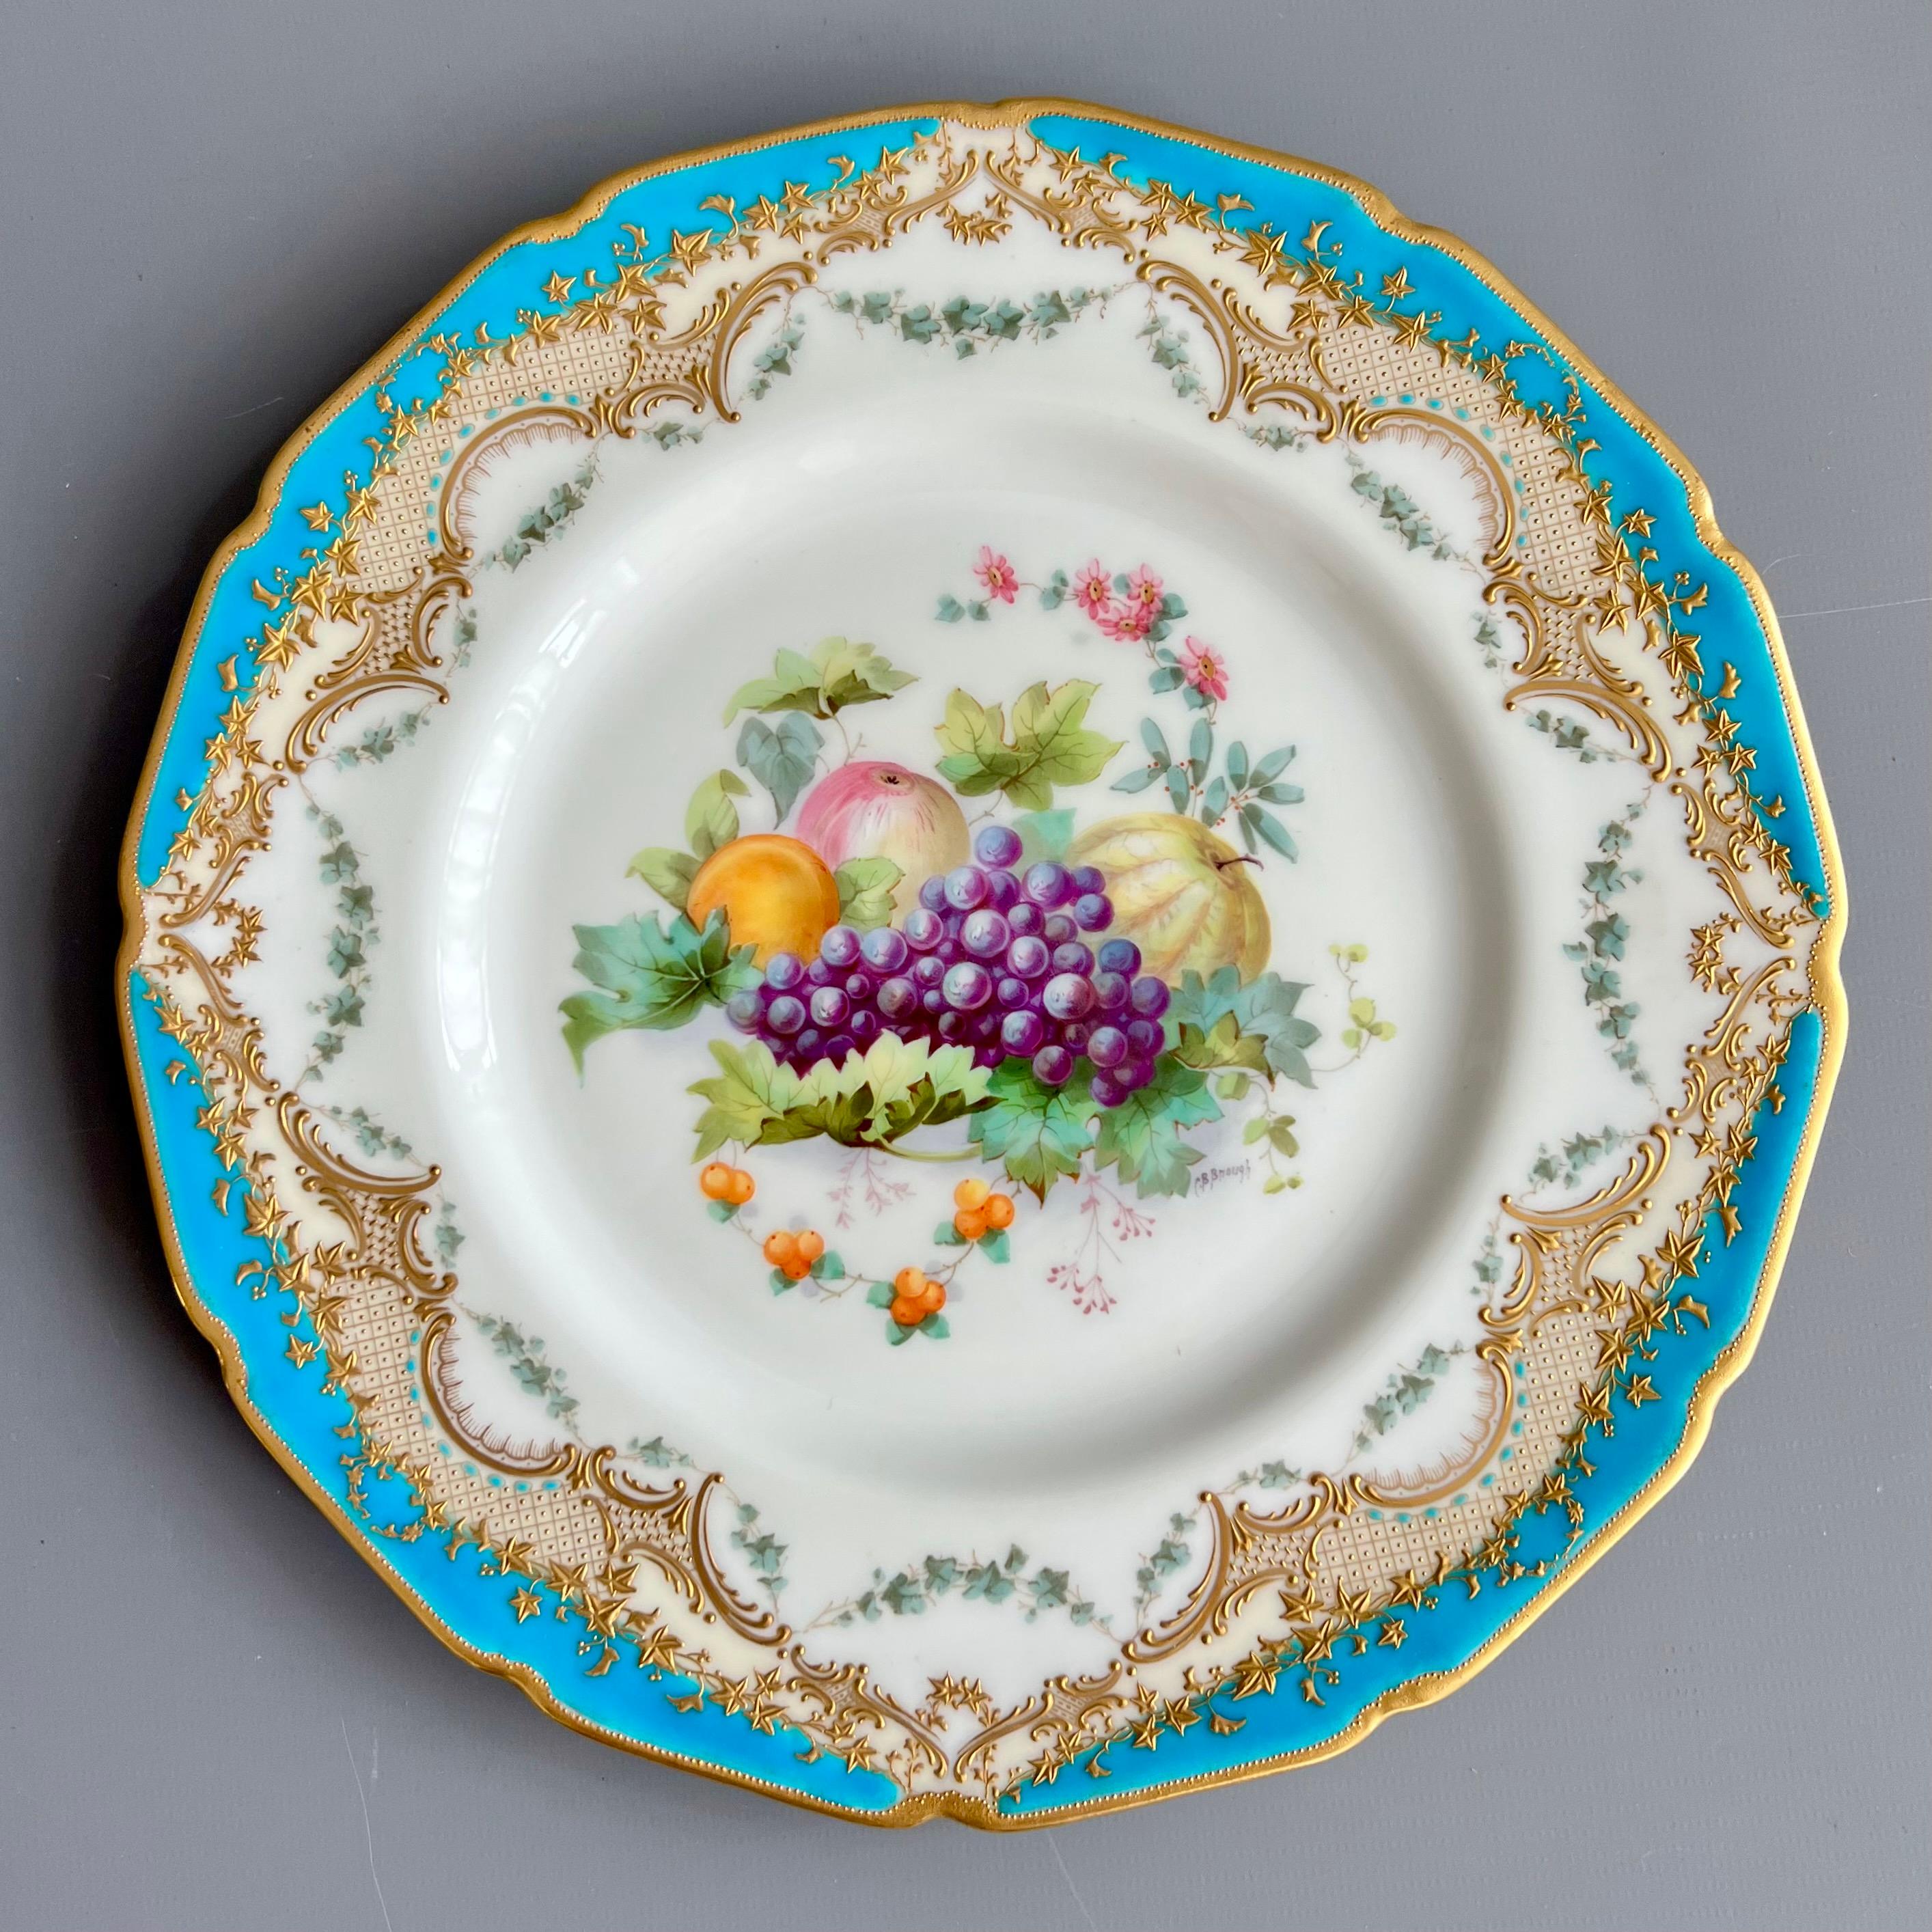 This is a stunning pair of plates made by Royal Doulton in 1903. The plates have beautiful turquoise and raised gilt borders and very accomplished fruit paintings in the centre by the well known painter Charles Brayford Brough.

The Royal Doulton